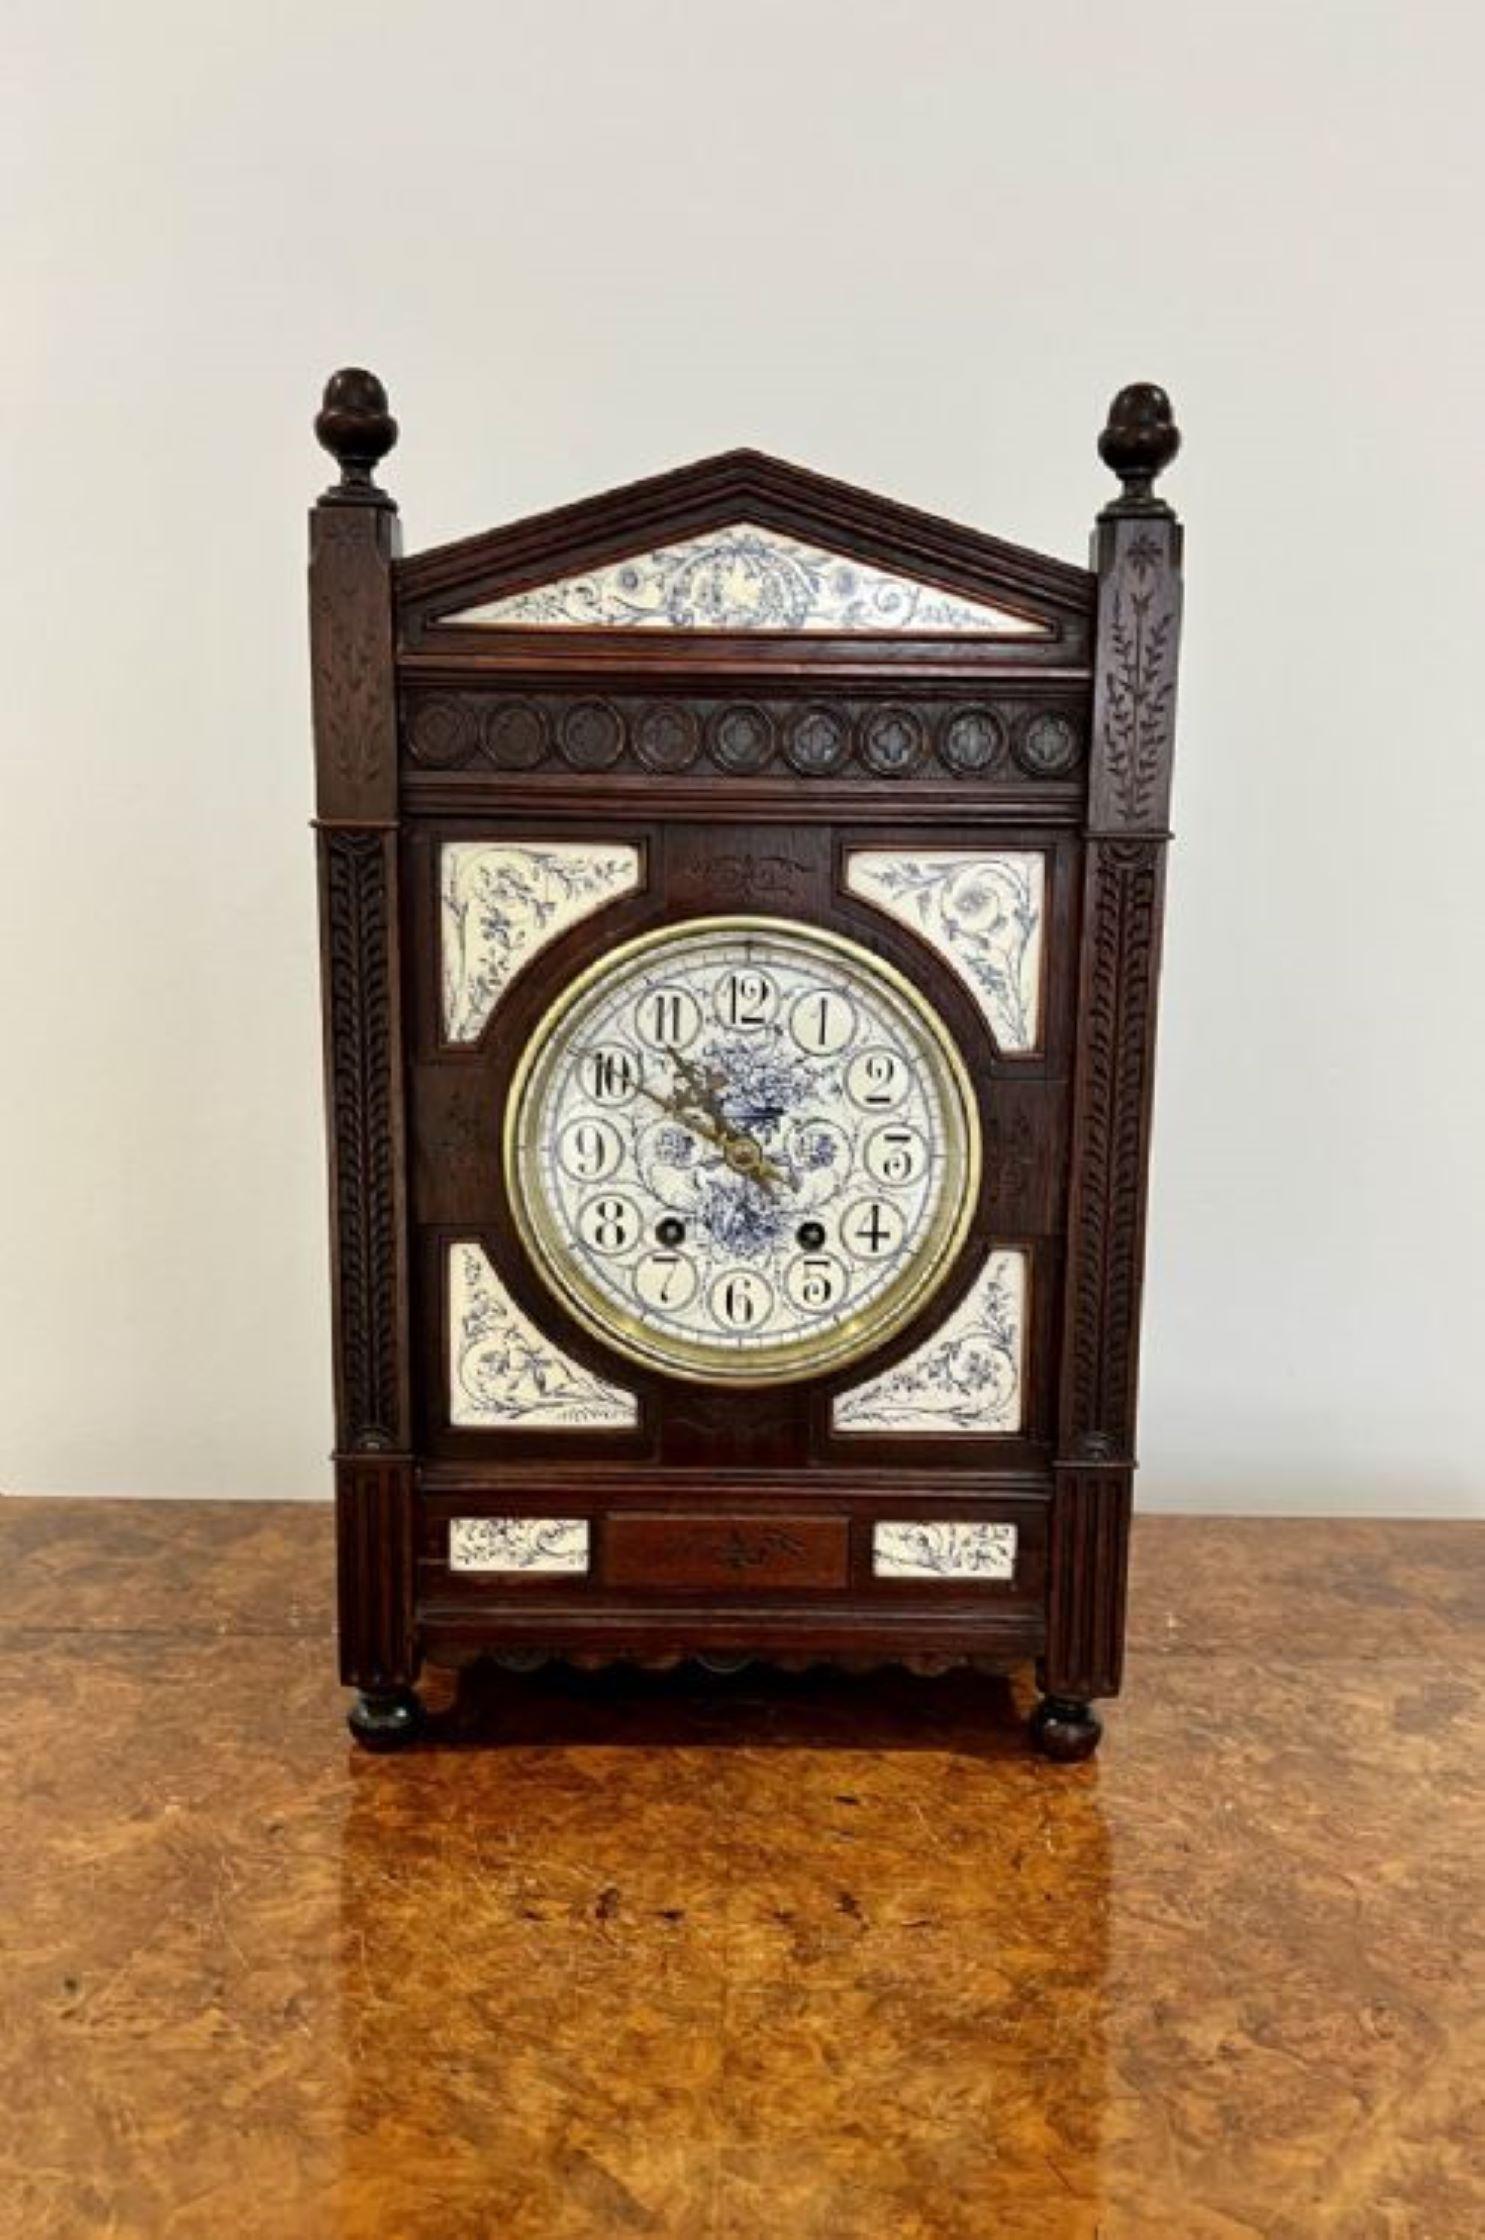 Antique Victorian quality ebonies aesthetic movement mantle clock having a quality painted dial and spandrels decorated with flowers and leaves in wonderful blue and white colours with an 8 day movement 
Please note all of our clocks are serviced